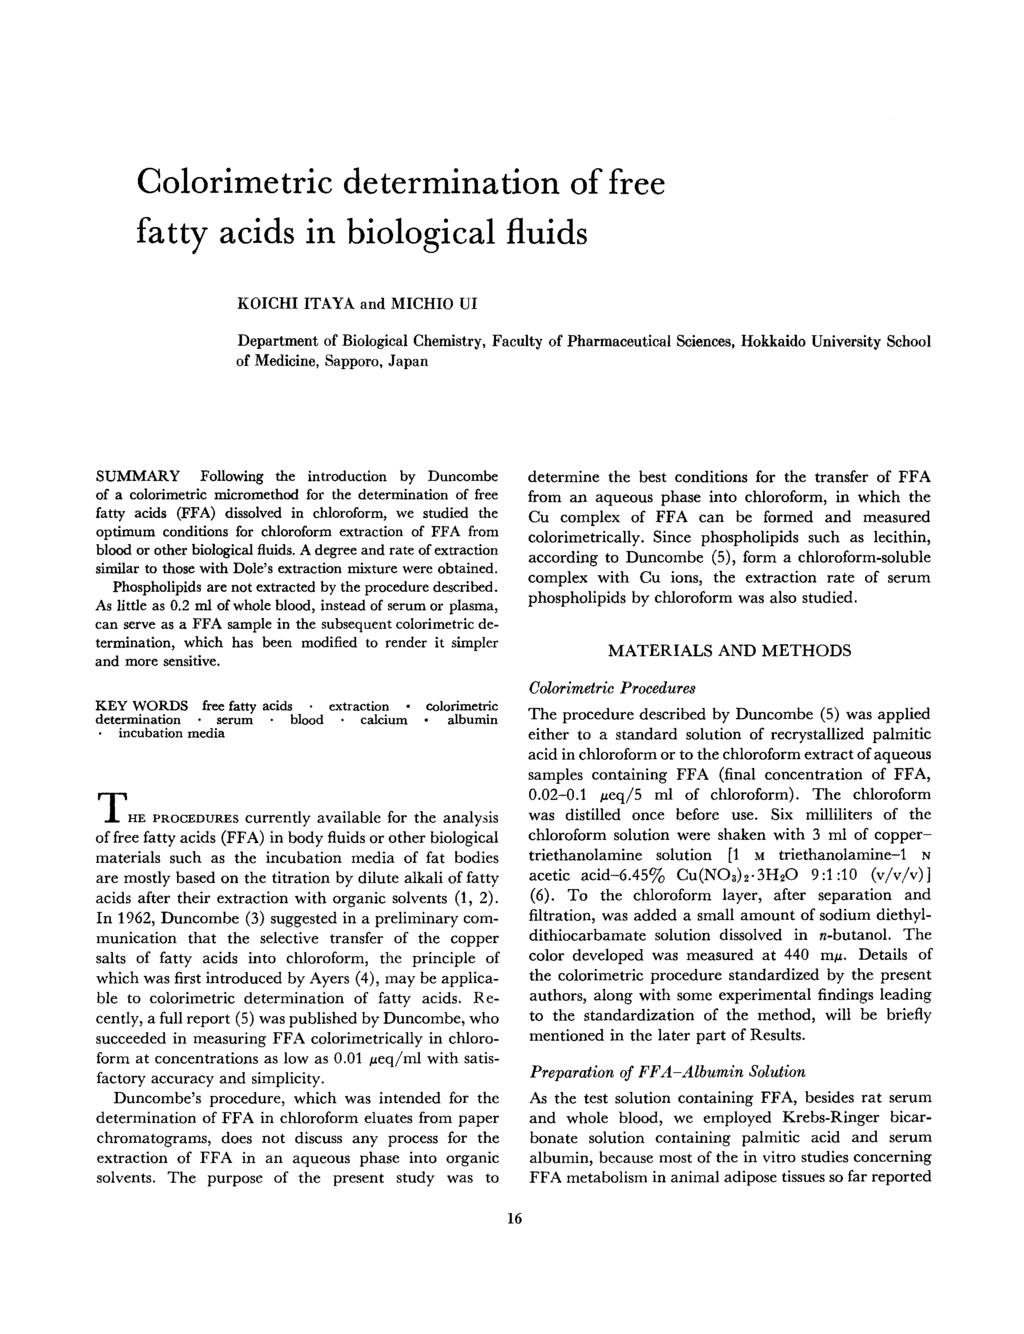 Colorimetric determination of free fatty acids in biological fluids KOICHI ITAYA and MICHIO UI Department of Biological Chemistry, Faculty of Pharmaceutical Sciences, Hokkaido University School of